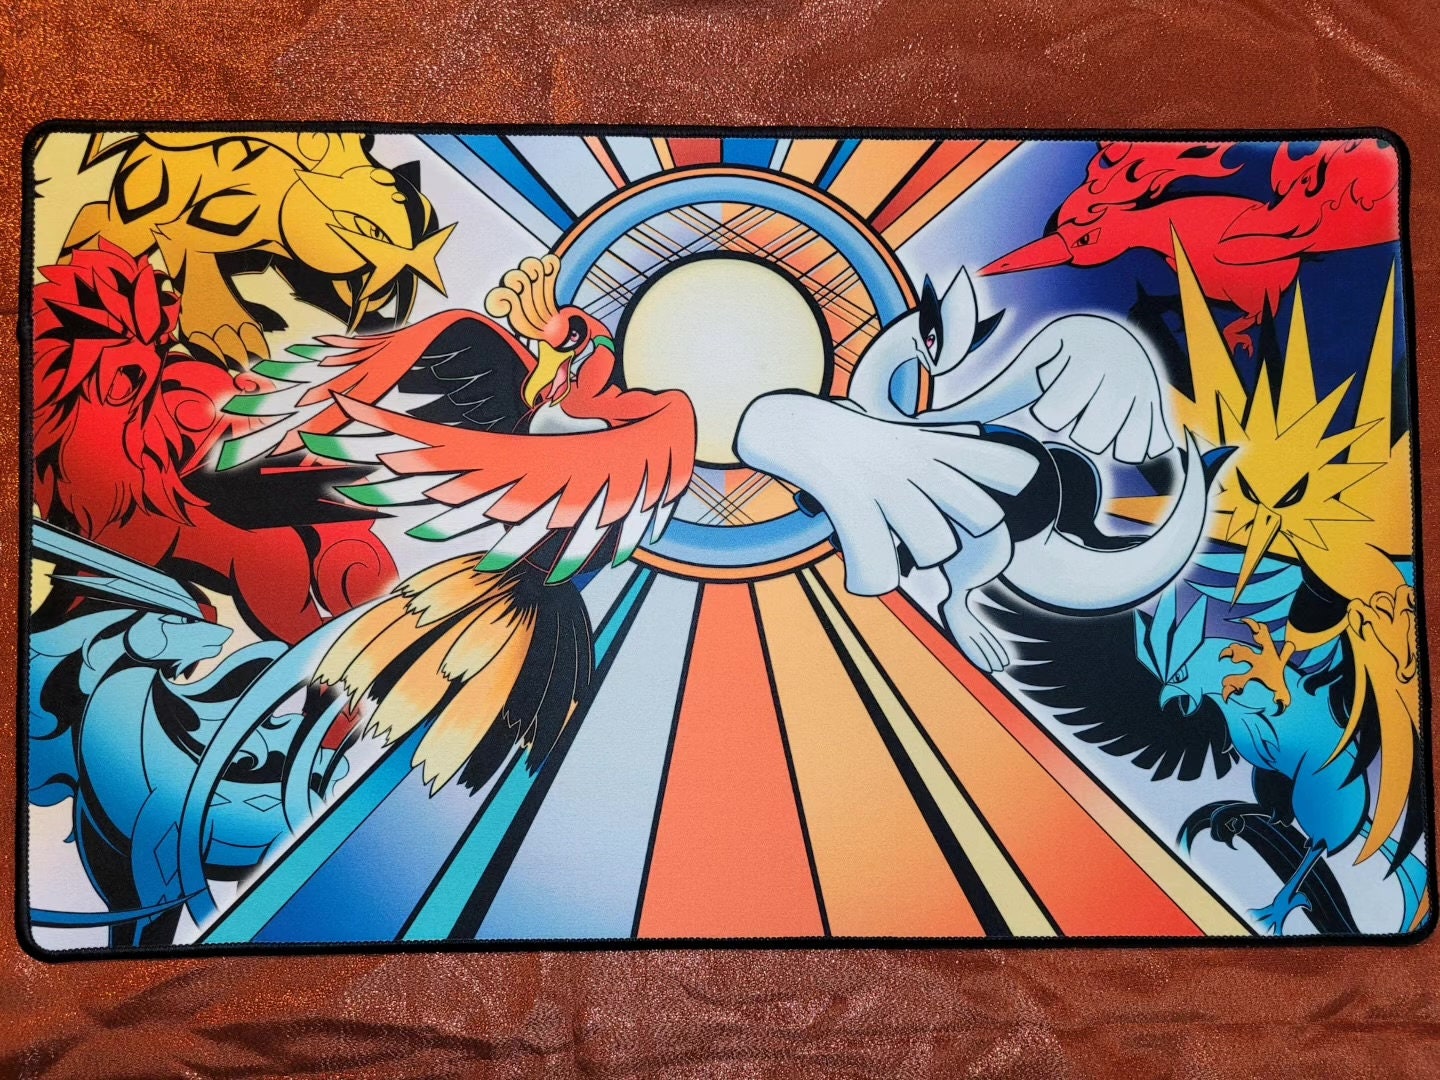 Download Ho-oh And Suicune Rainbow Pokemon Battle Background